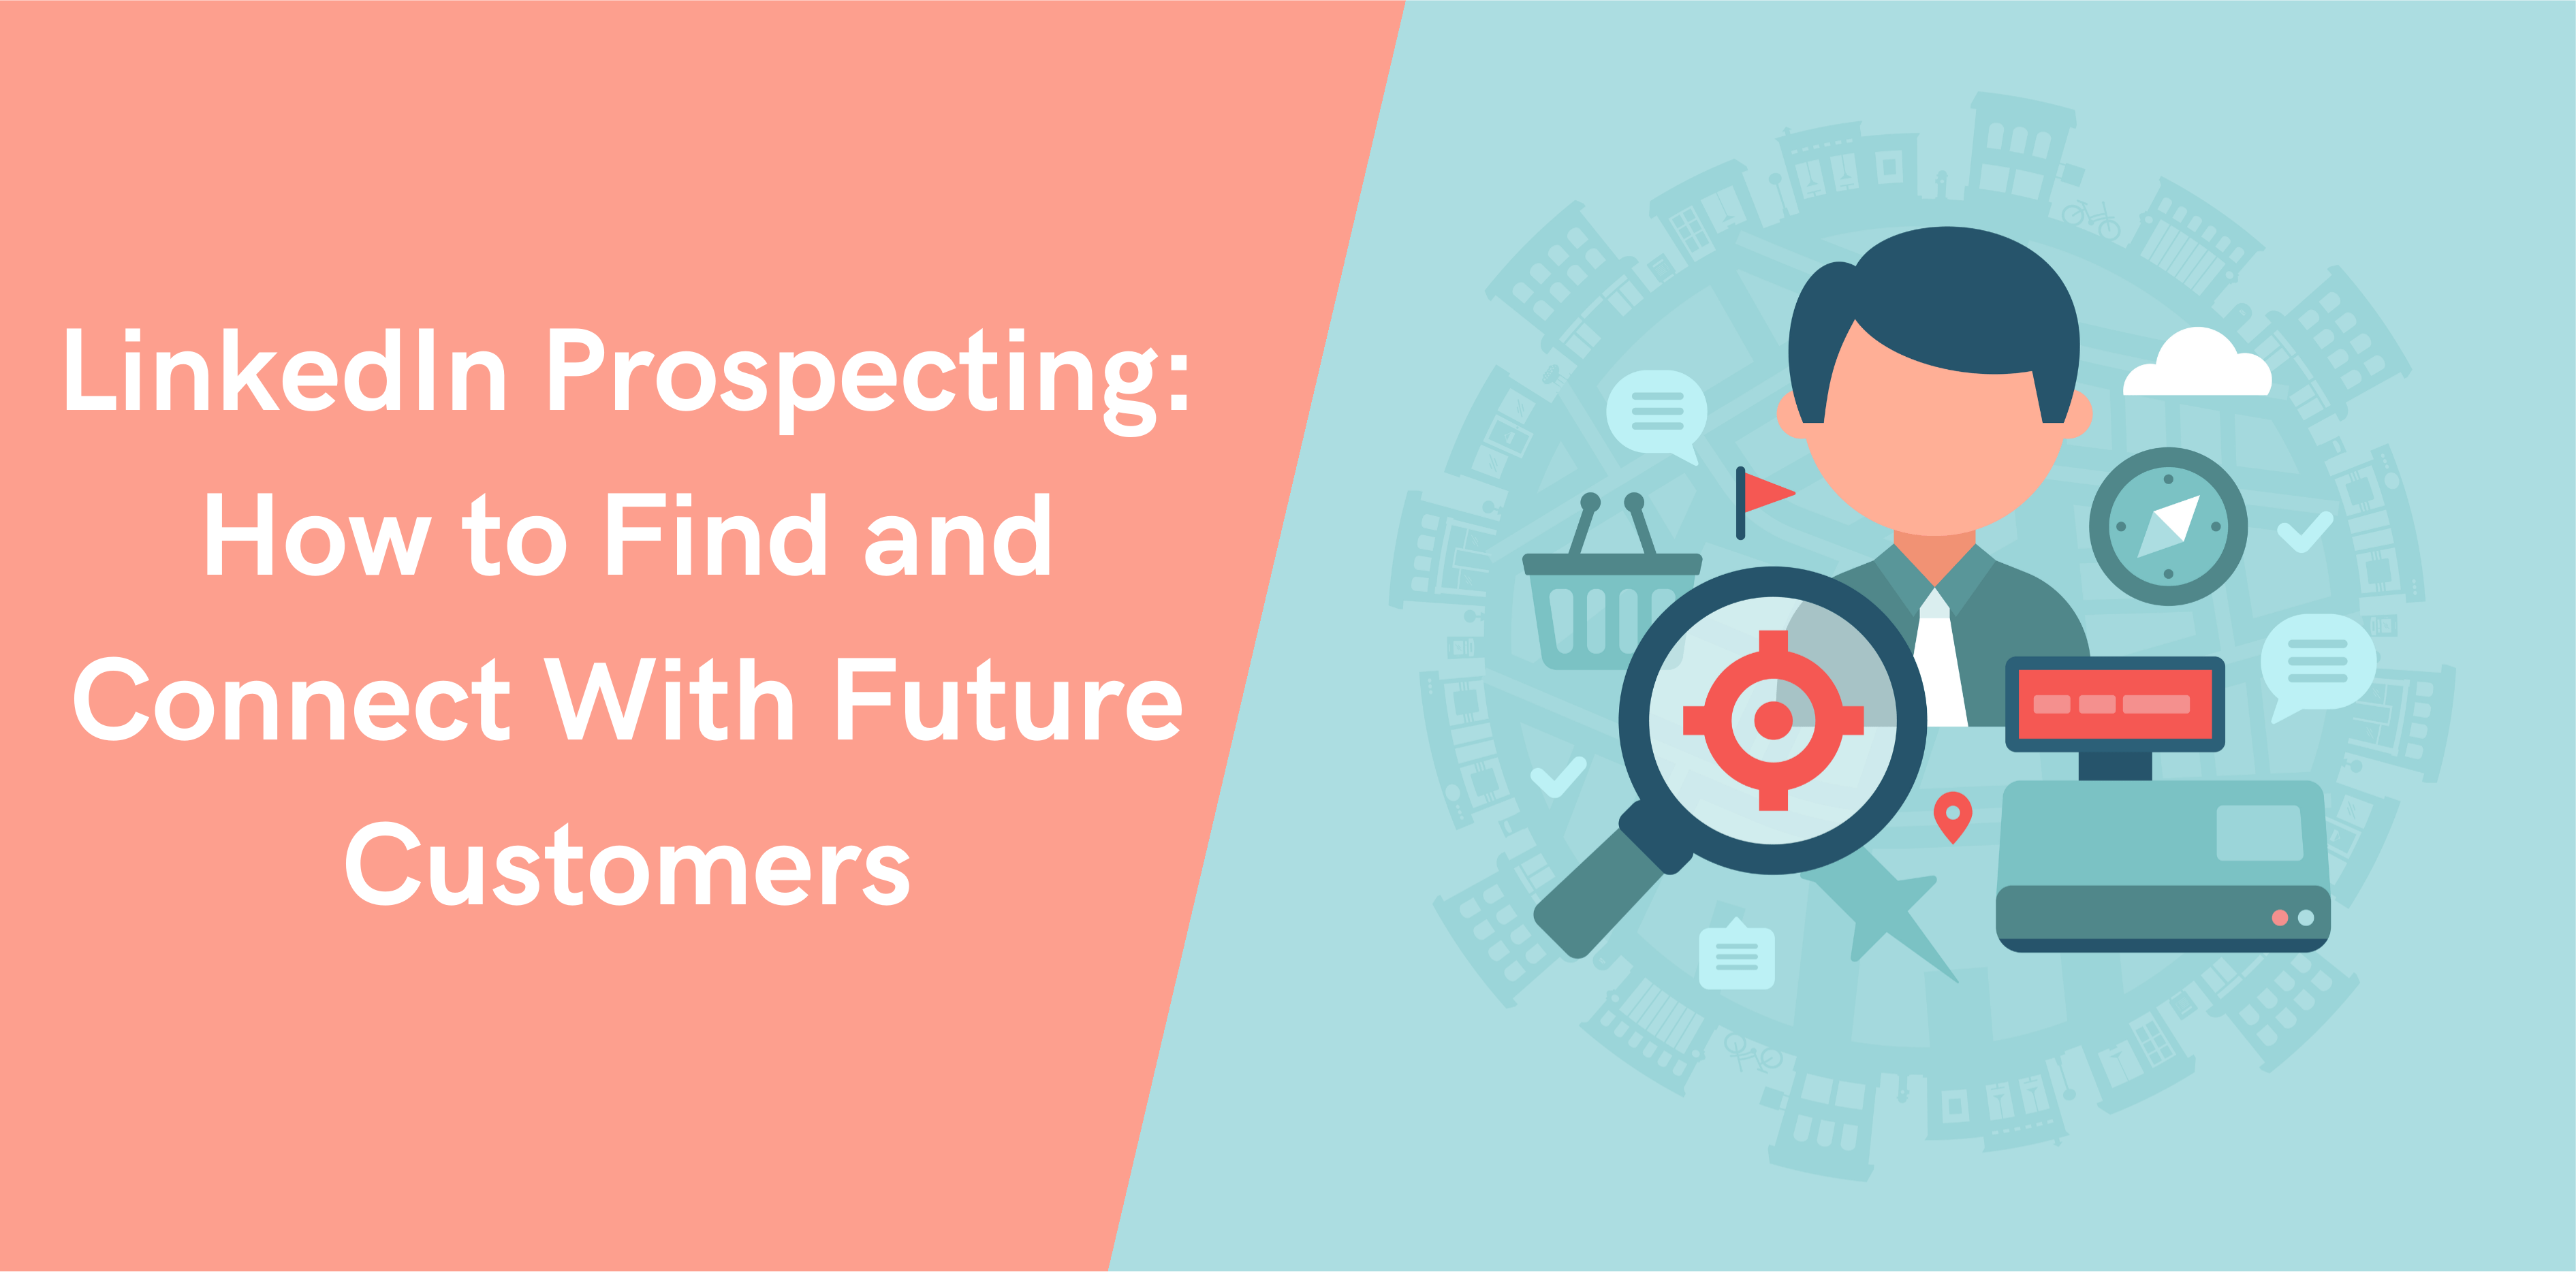 Thumbnail-LinkedIn-Prospecting-How-to-Find-and-Connect-With-Future-Customers